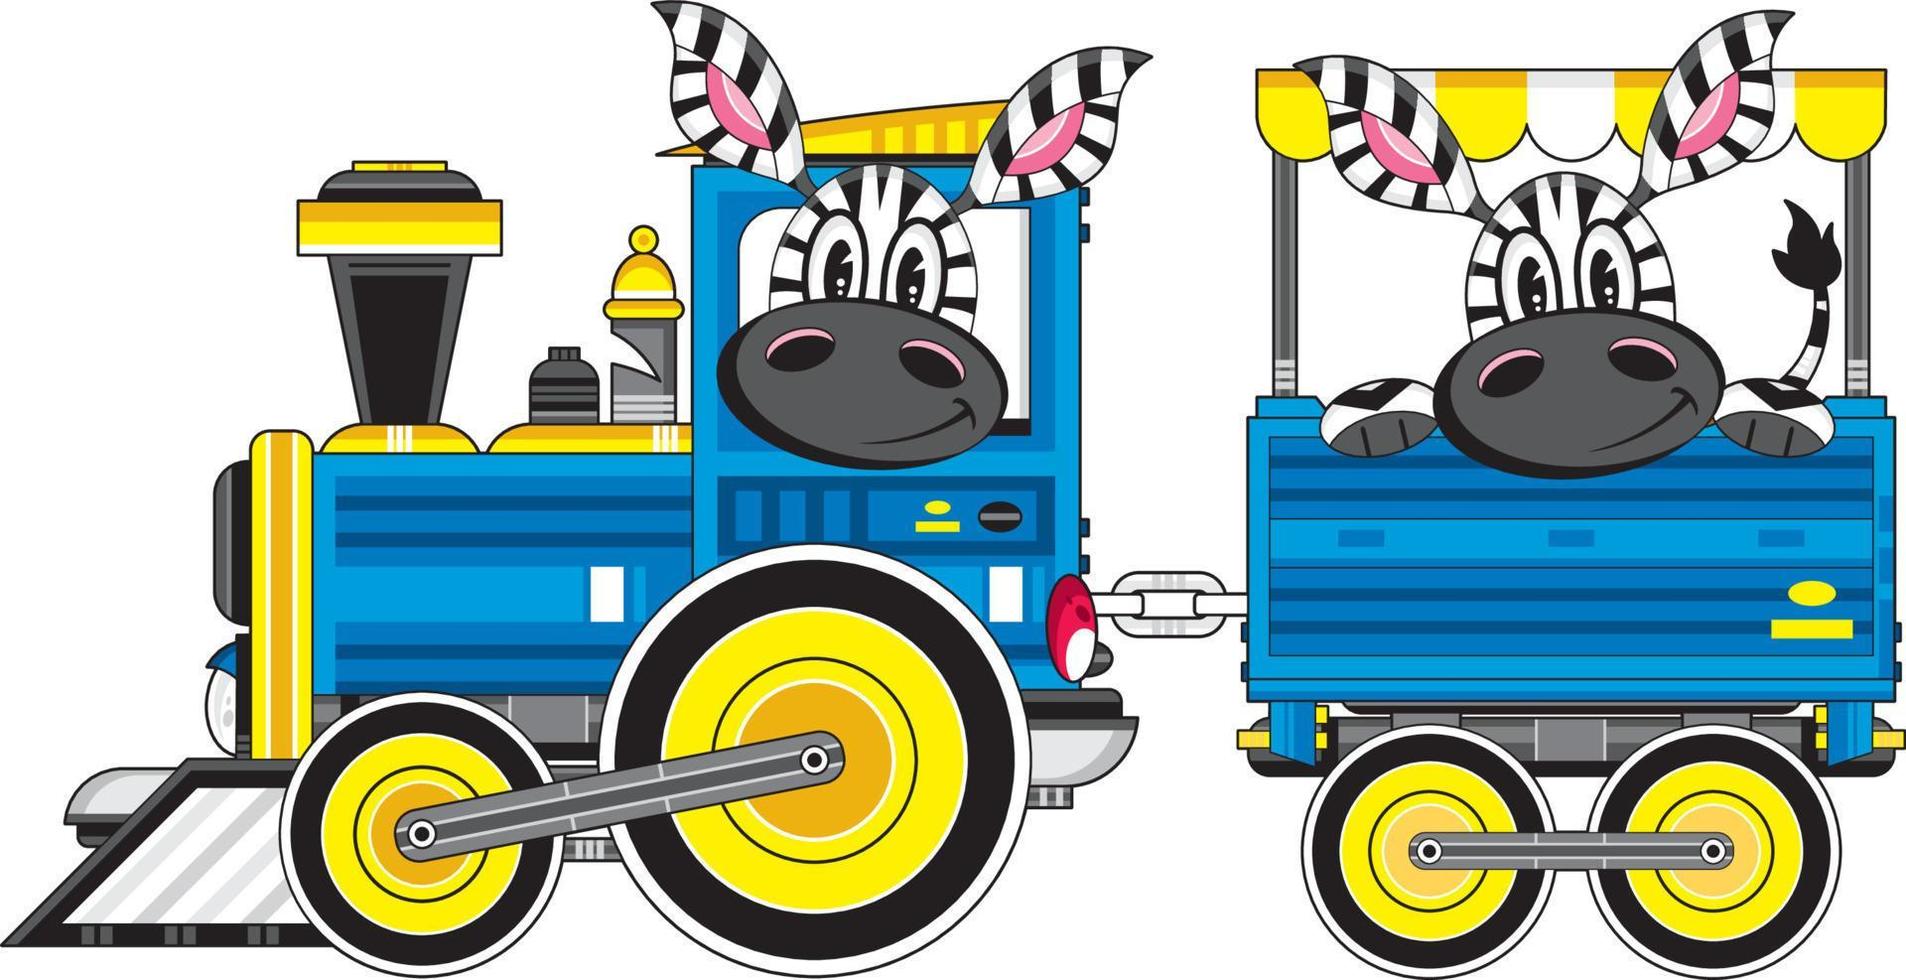 Cartoon Zebra Driving Train with Passenger in Carriage vector